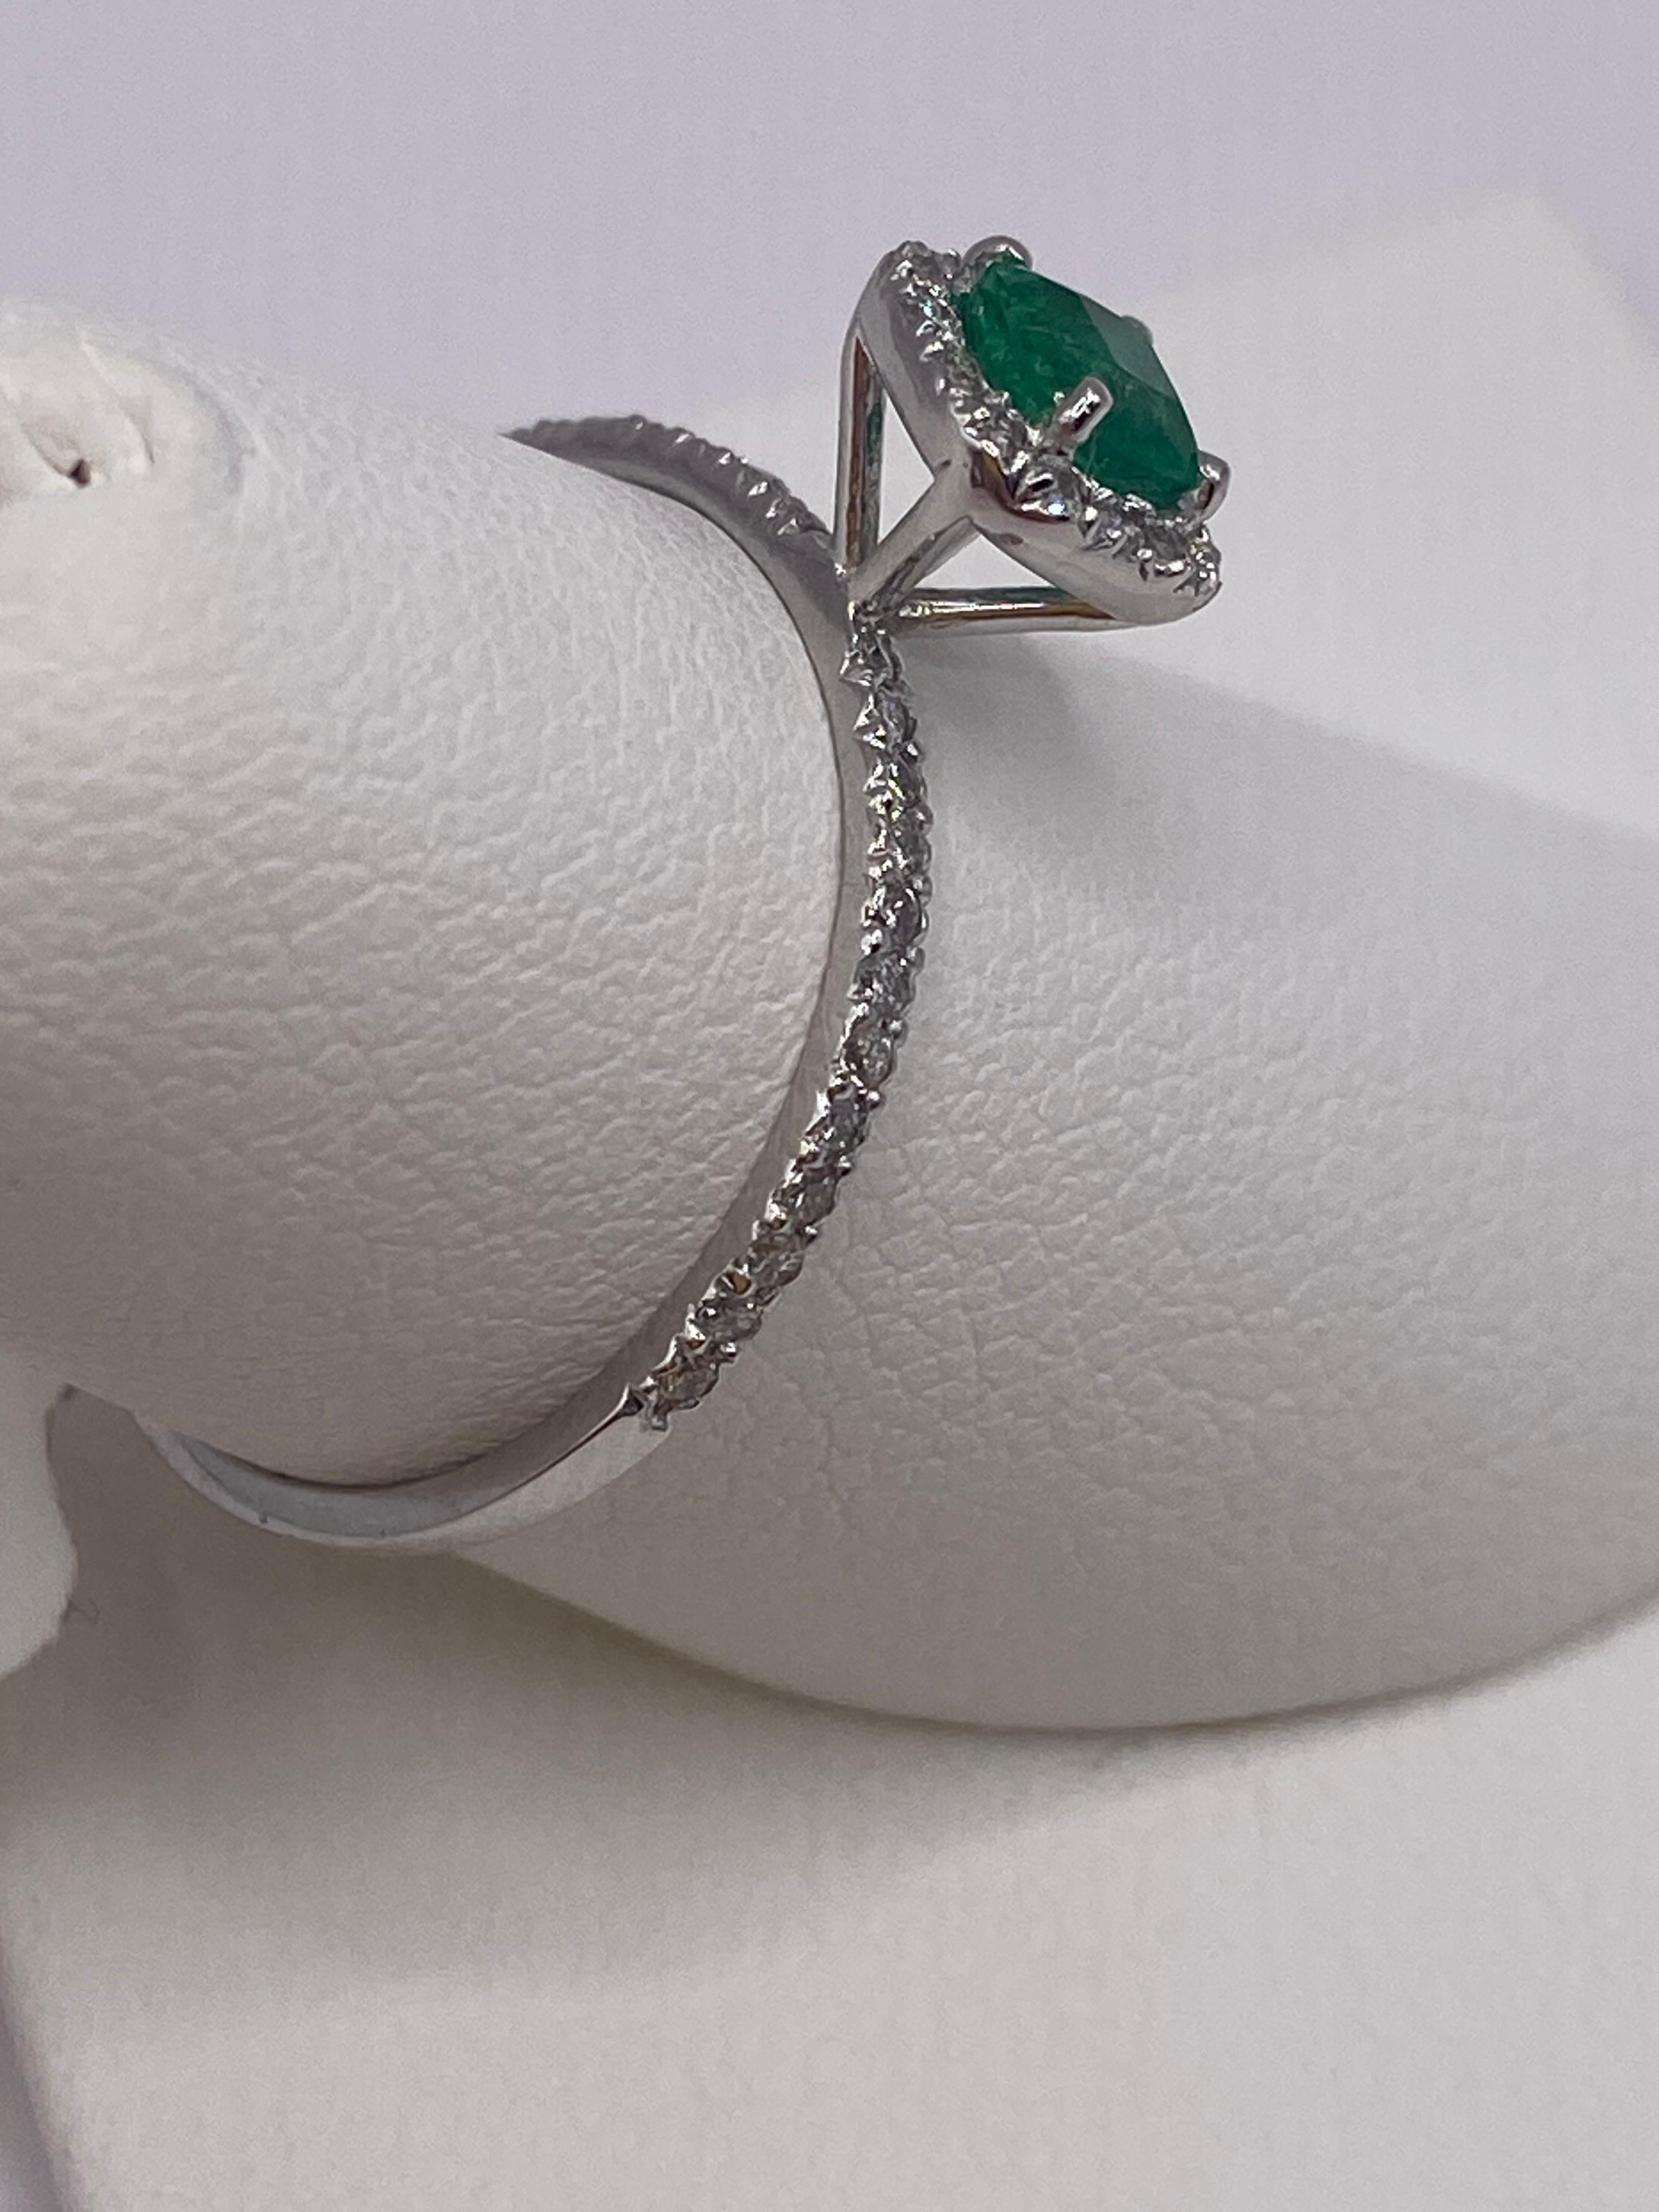 0.59ctw Cushion Cut Emerald & Round Diamond Petite Ring in 14KT White Gold For Sale 2